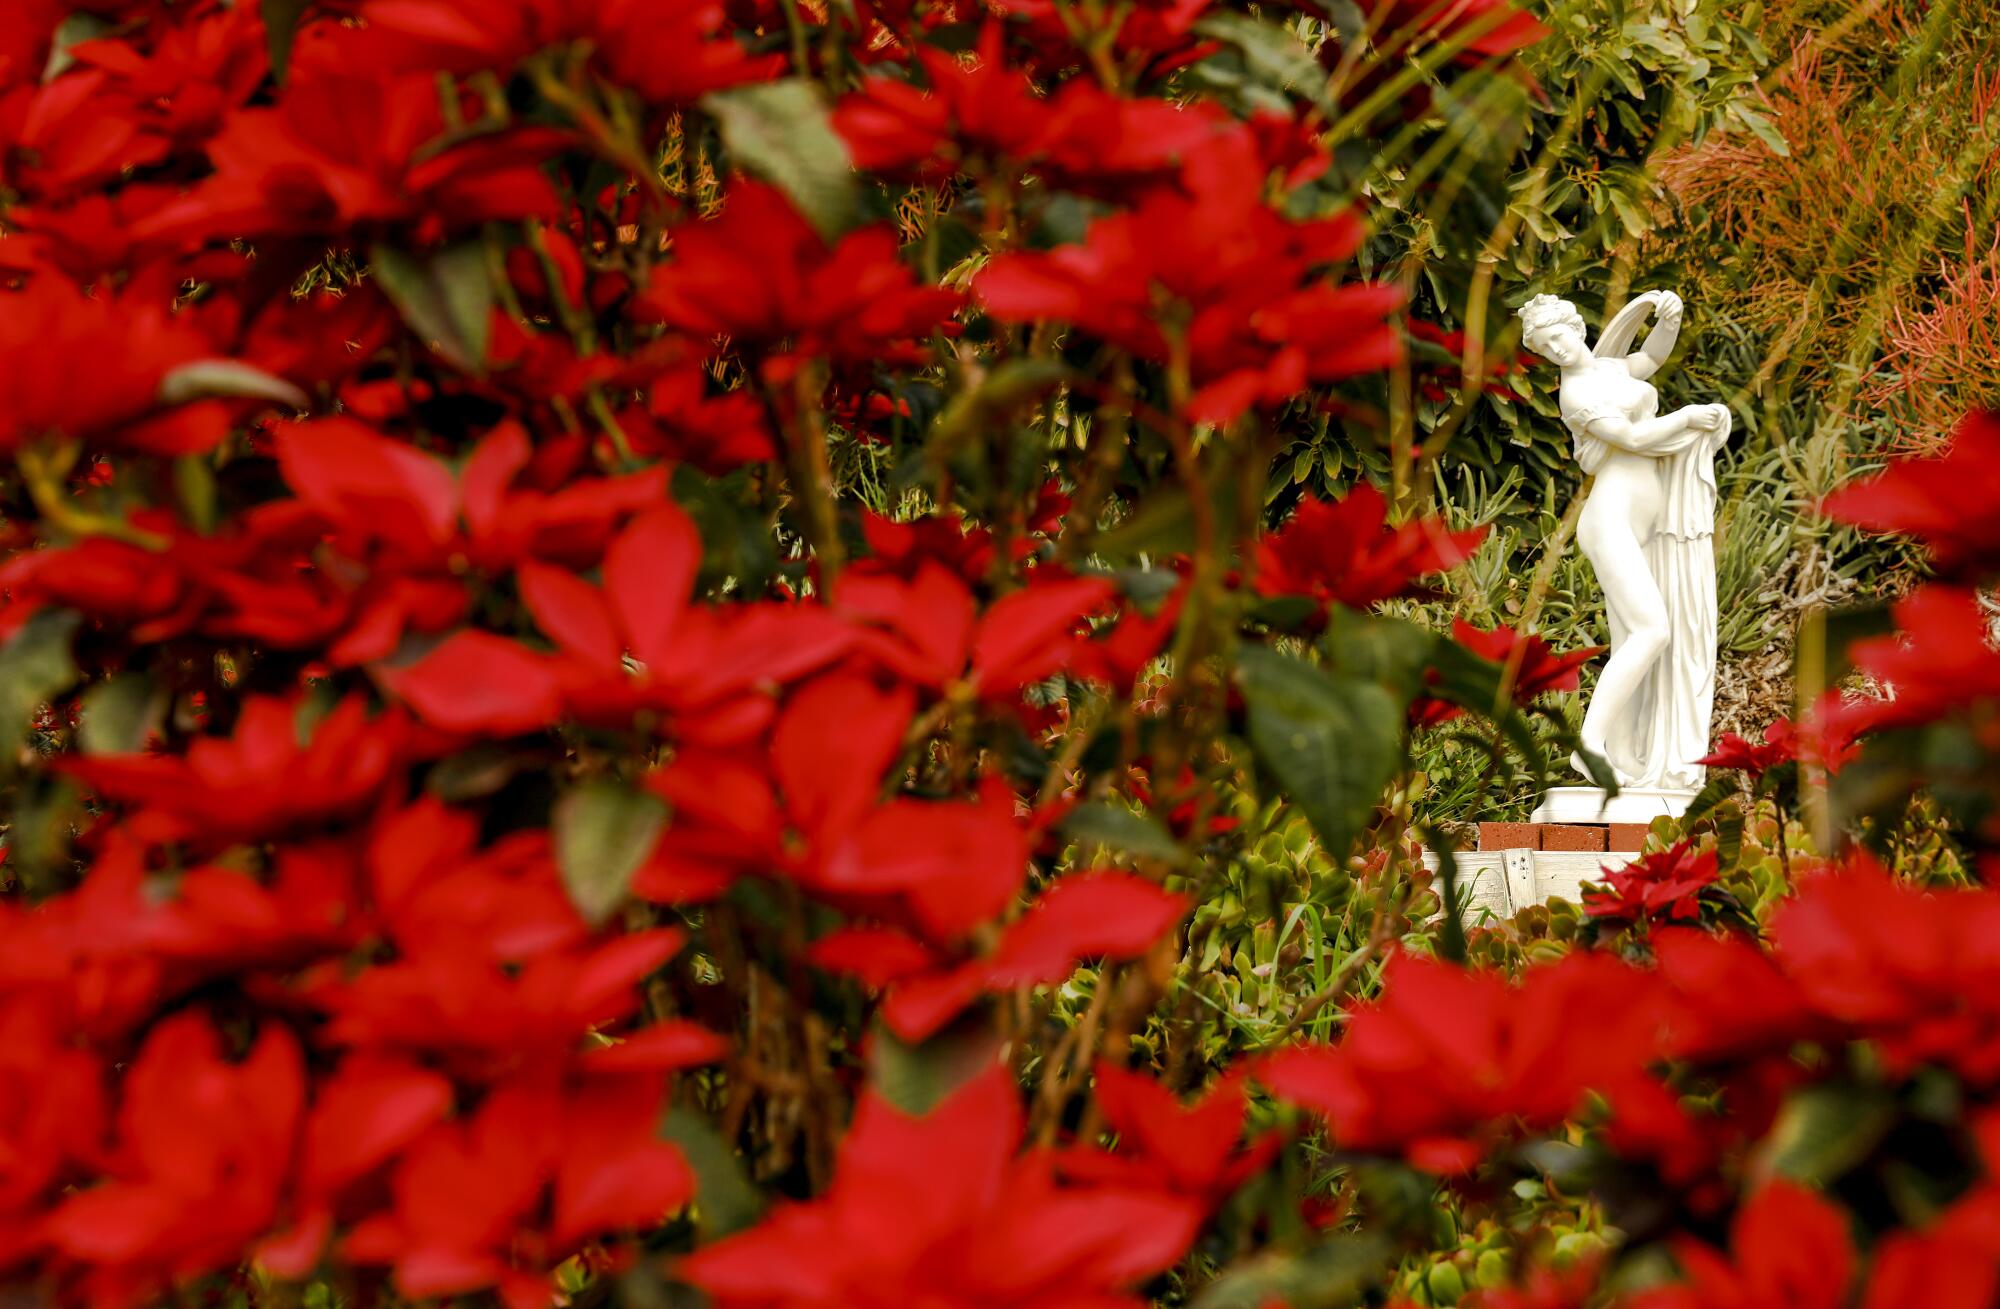 A nymph sculpture framed by poinsettias 